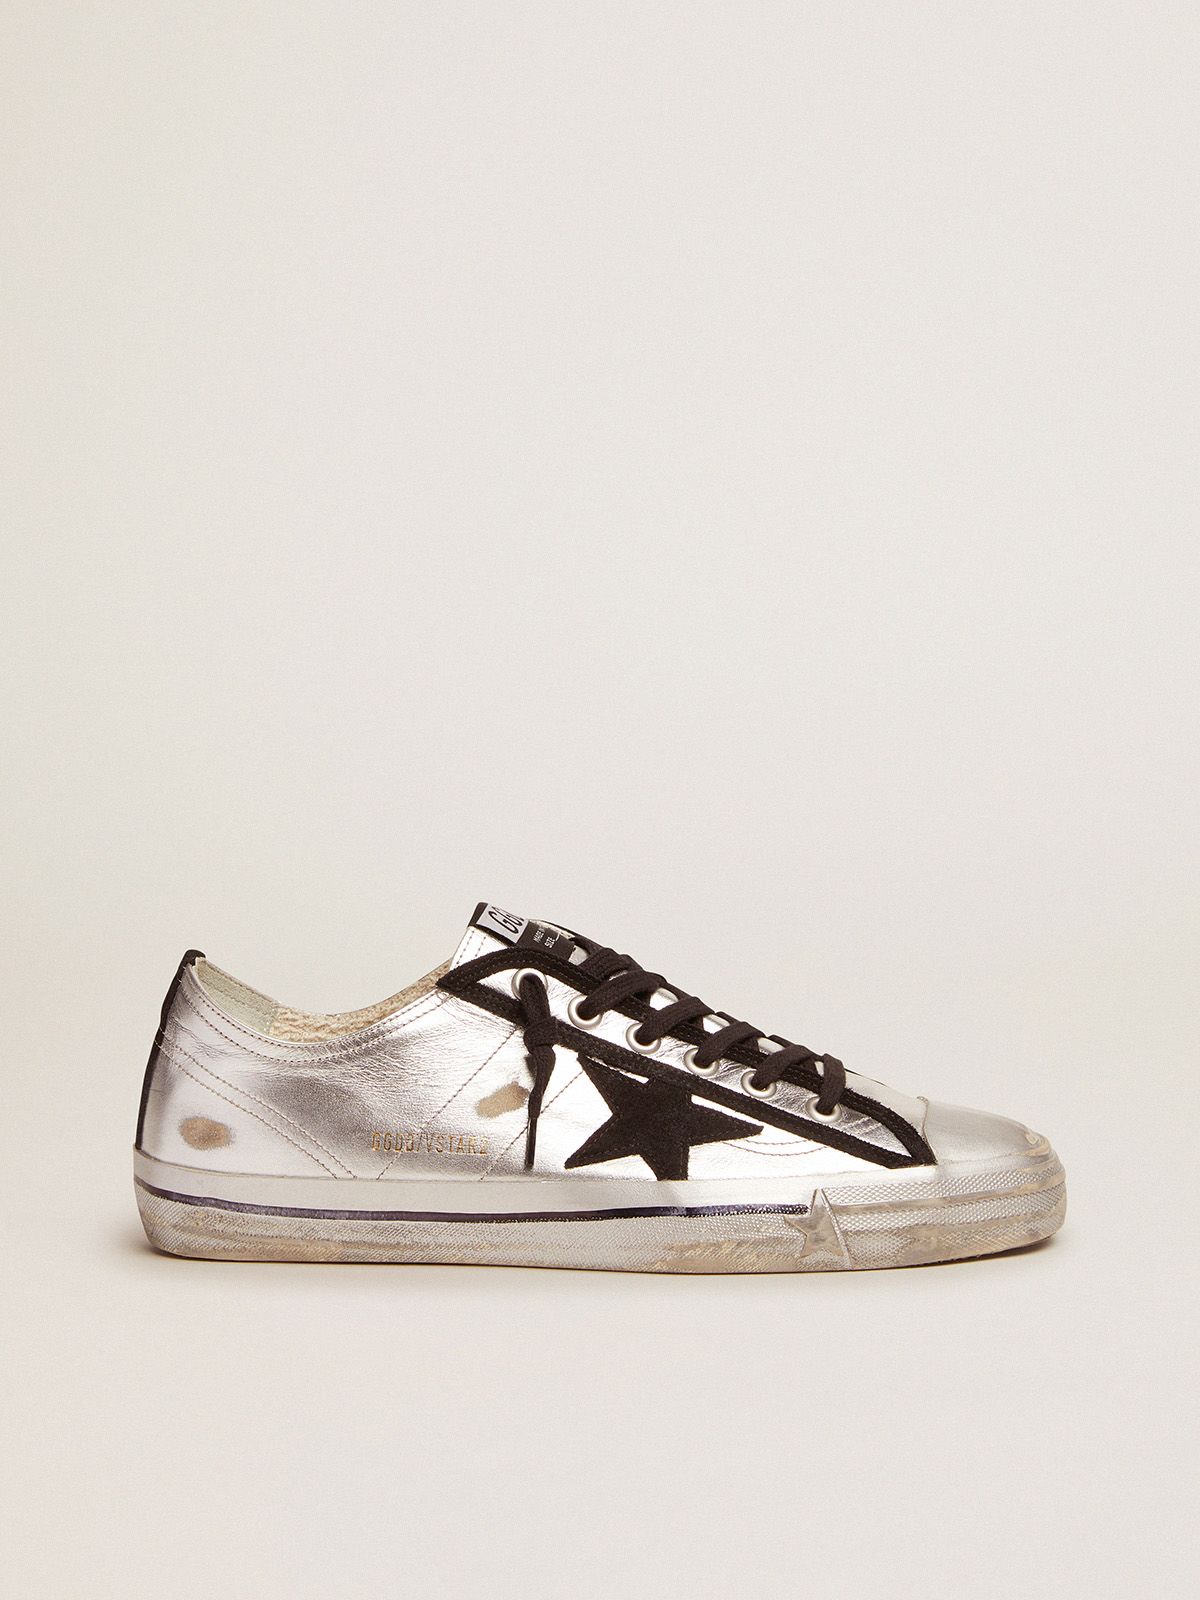 V-Star sneakers in silver laminated leather with black suede details | 